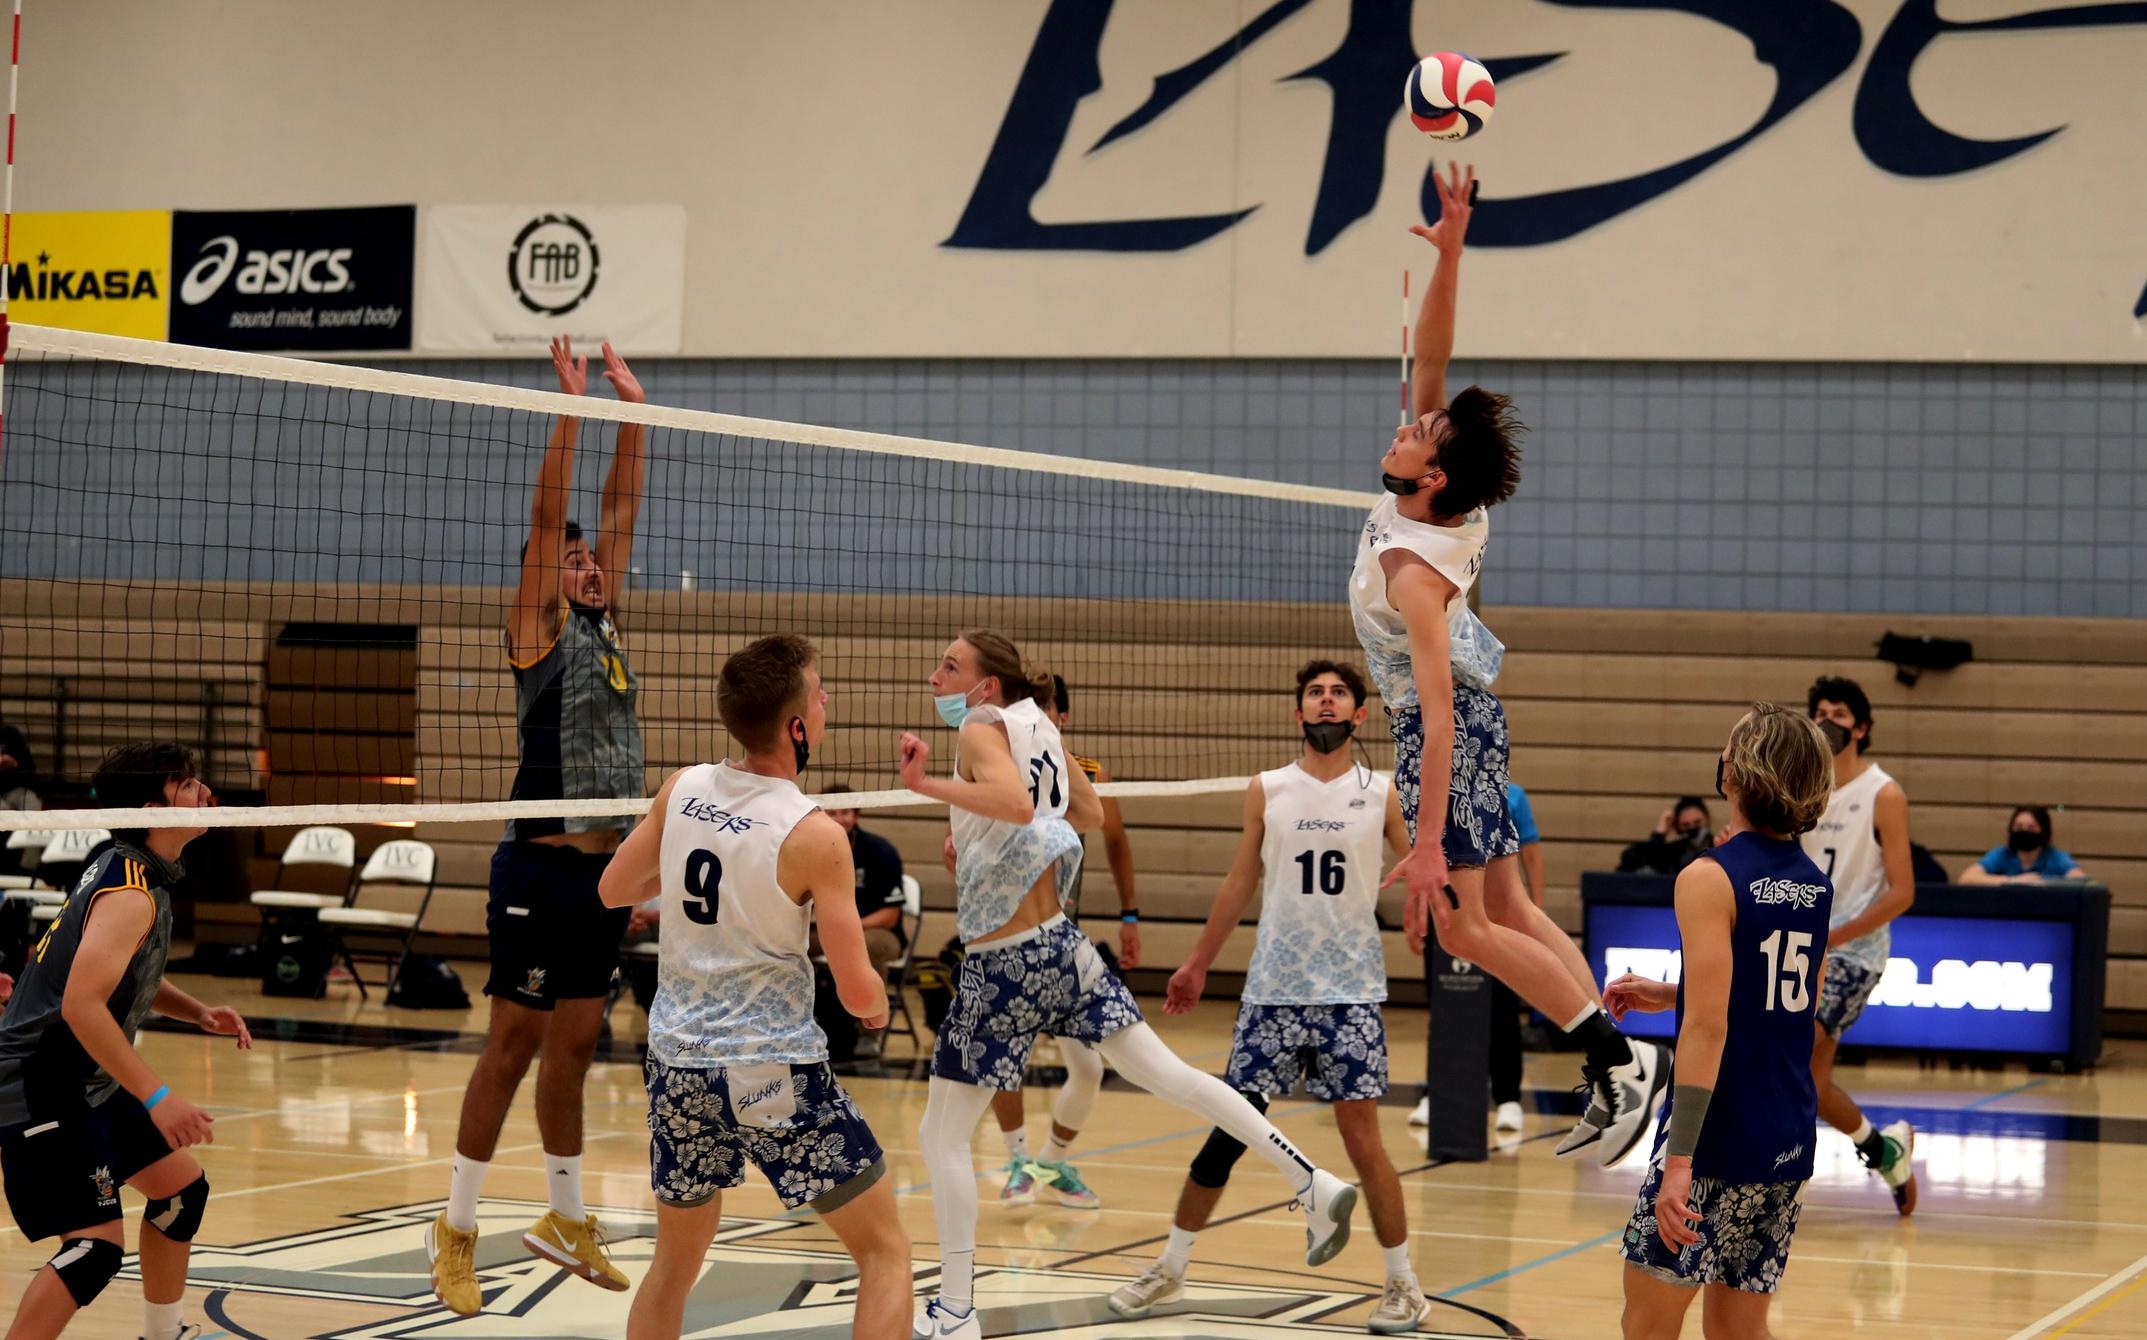 Men's volleyball team on to tourney final with Fullerton sweep